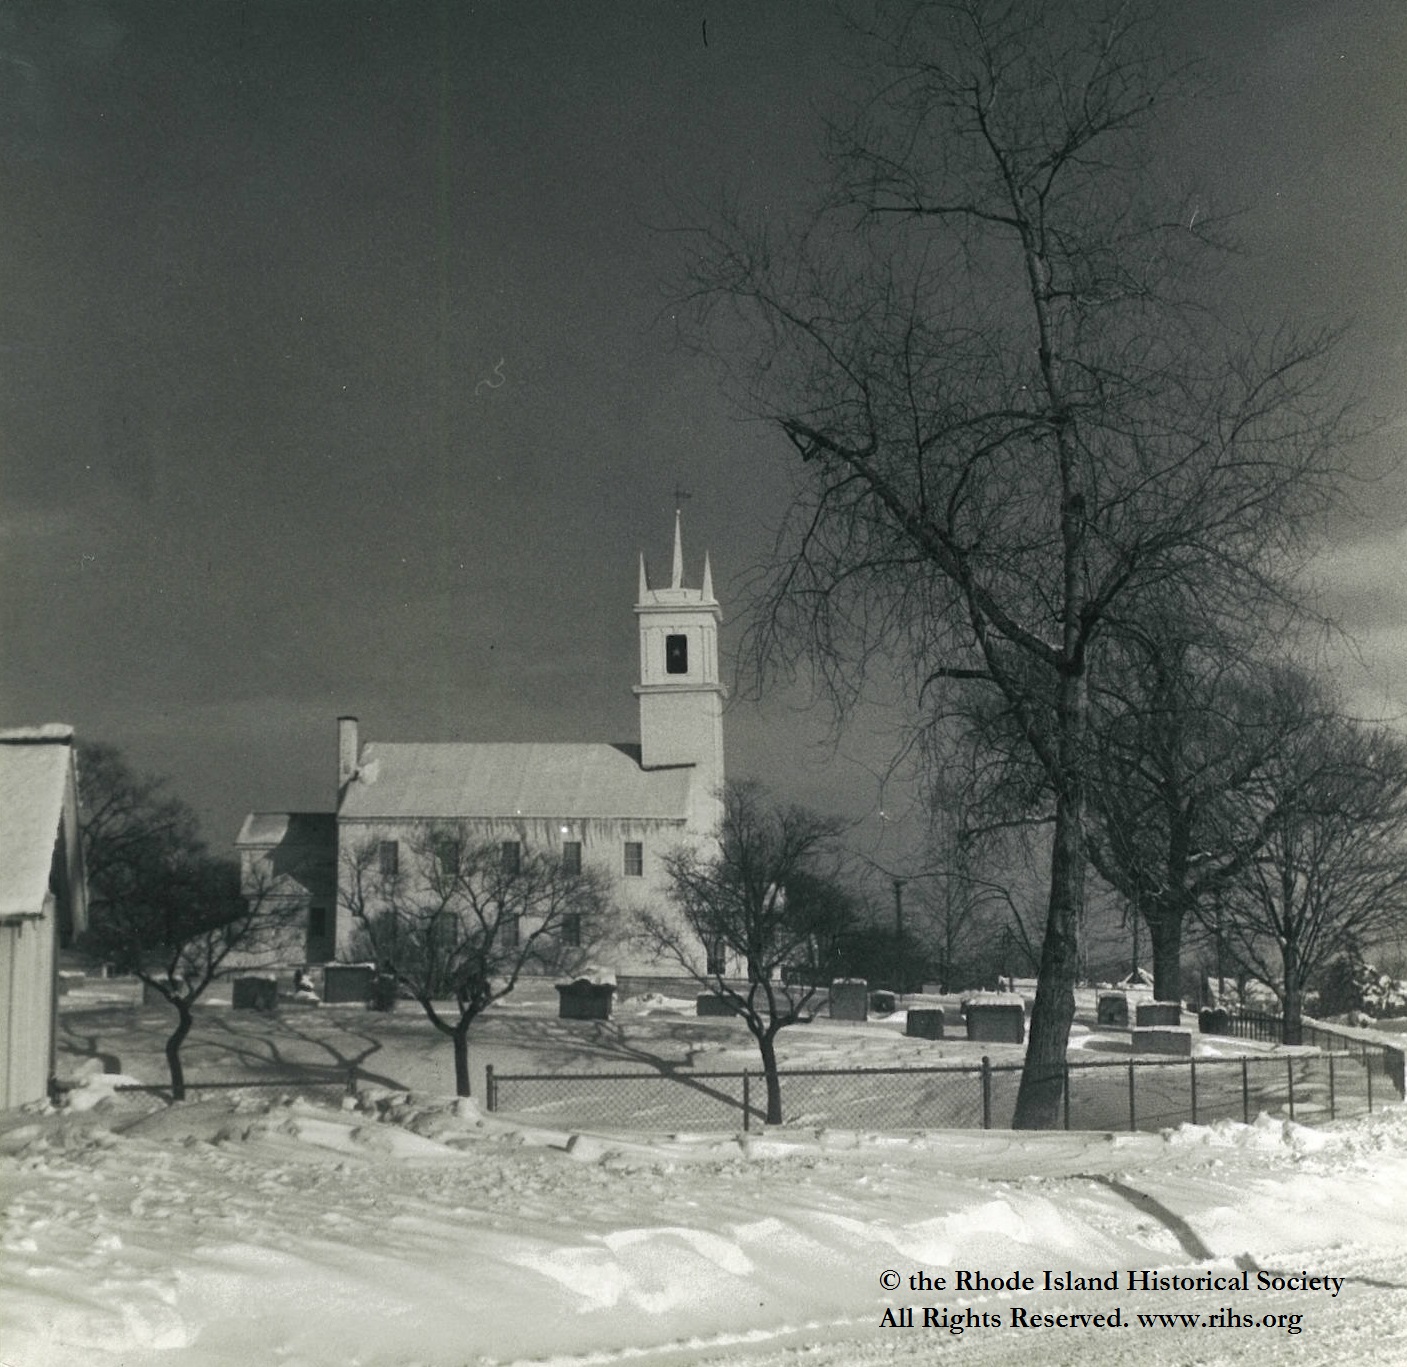 Estey, Charlotte (photographer). [View of the Newman Congregational Church in the snow]. East Providence, Rhode Island. 1945-1955. Photograph: Silver gelatin. Mary Elizabeth Robinson Research Center, G Lot 144, Charlotte Estey Collection.